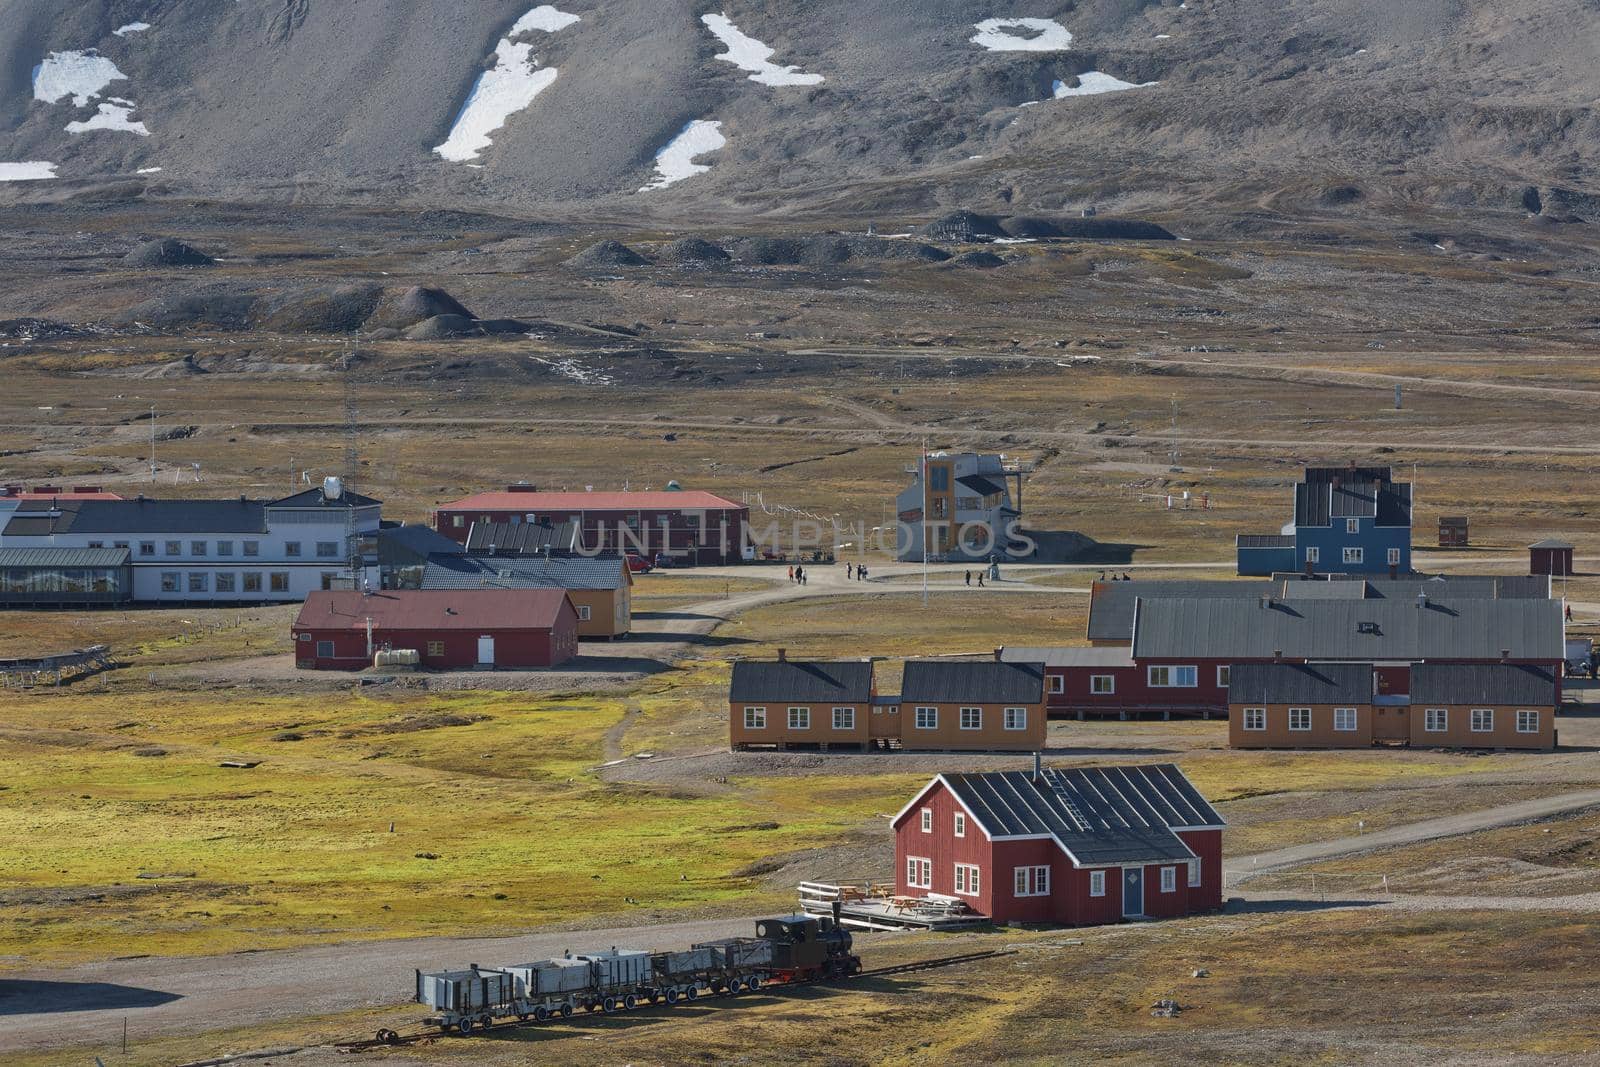 The small town of Ny Alesund in Svalbard, a Norwegian archipelago between Norway and the North Pole. This is the most northerly civilian settlement in the world and has 16 permanent research stations by wondry